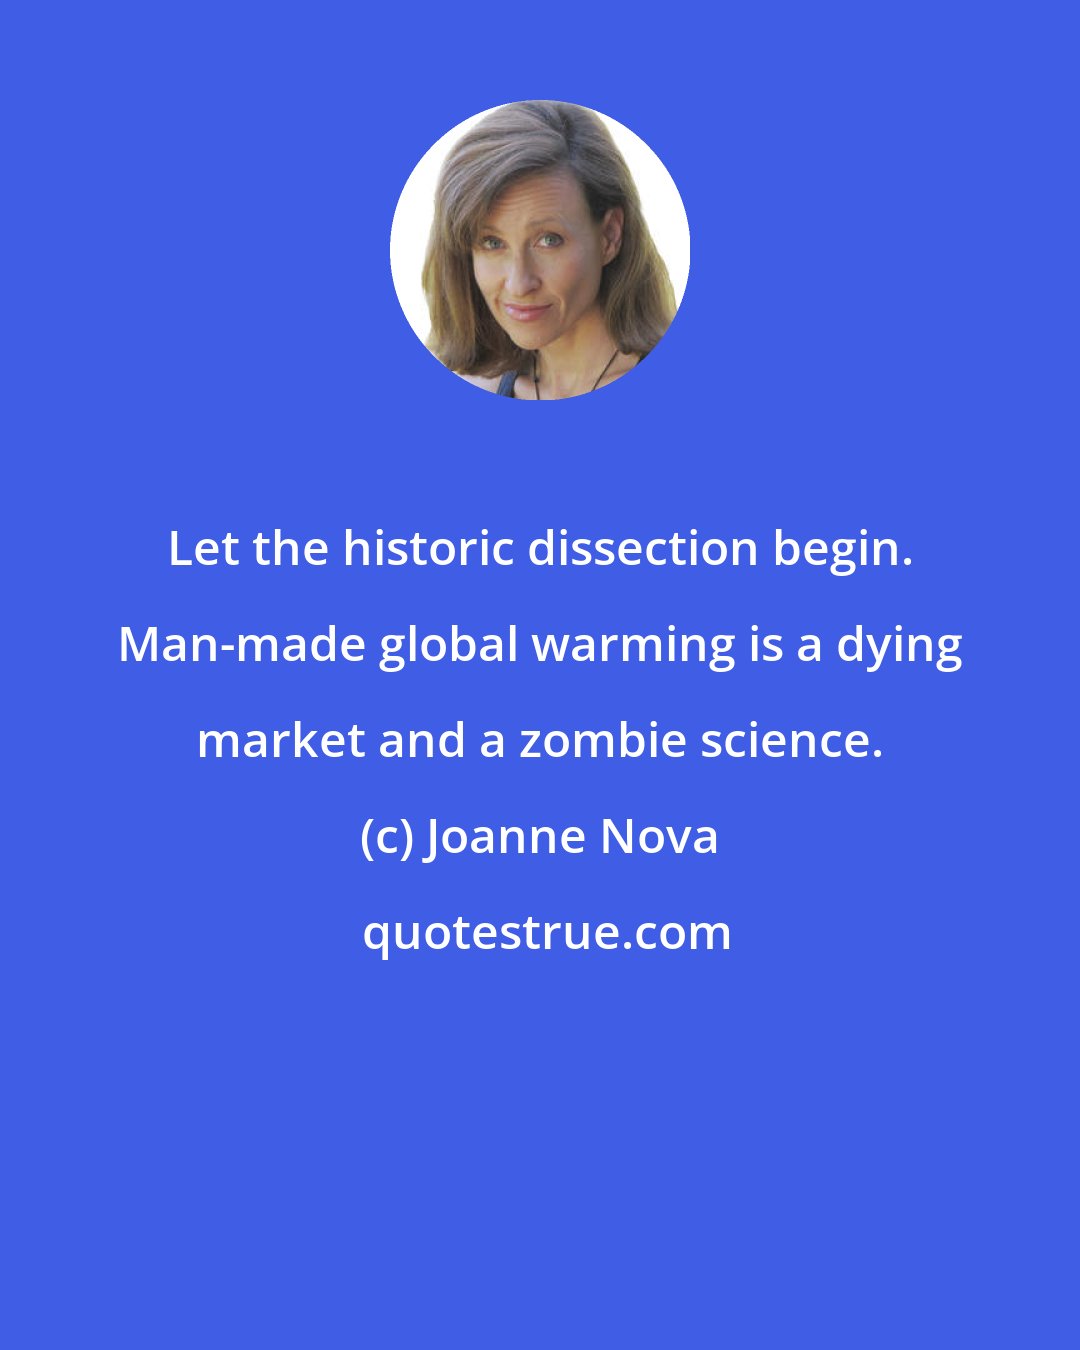 Joanne Nova: Let the historic dissection begin. Man-made global warming is a dying market and a zombie science.